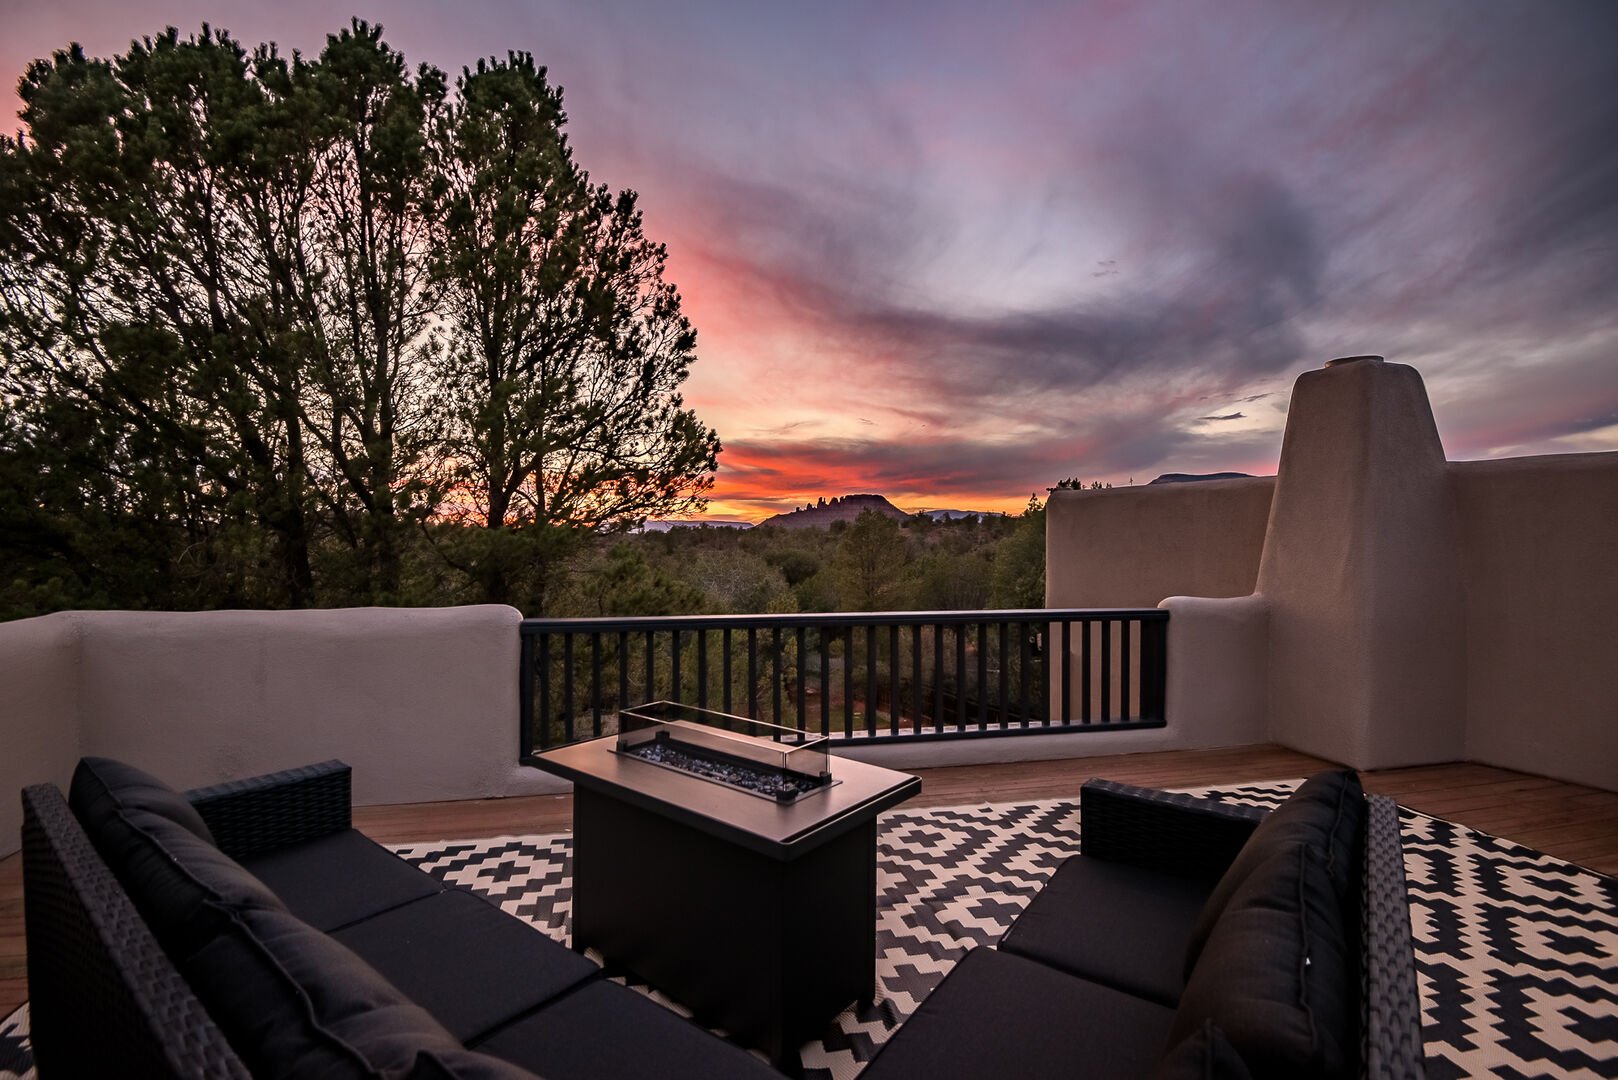 Enjoy the Upper Deck Fire Pit and Views!